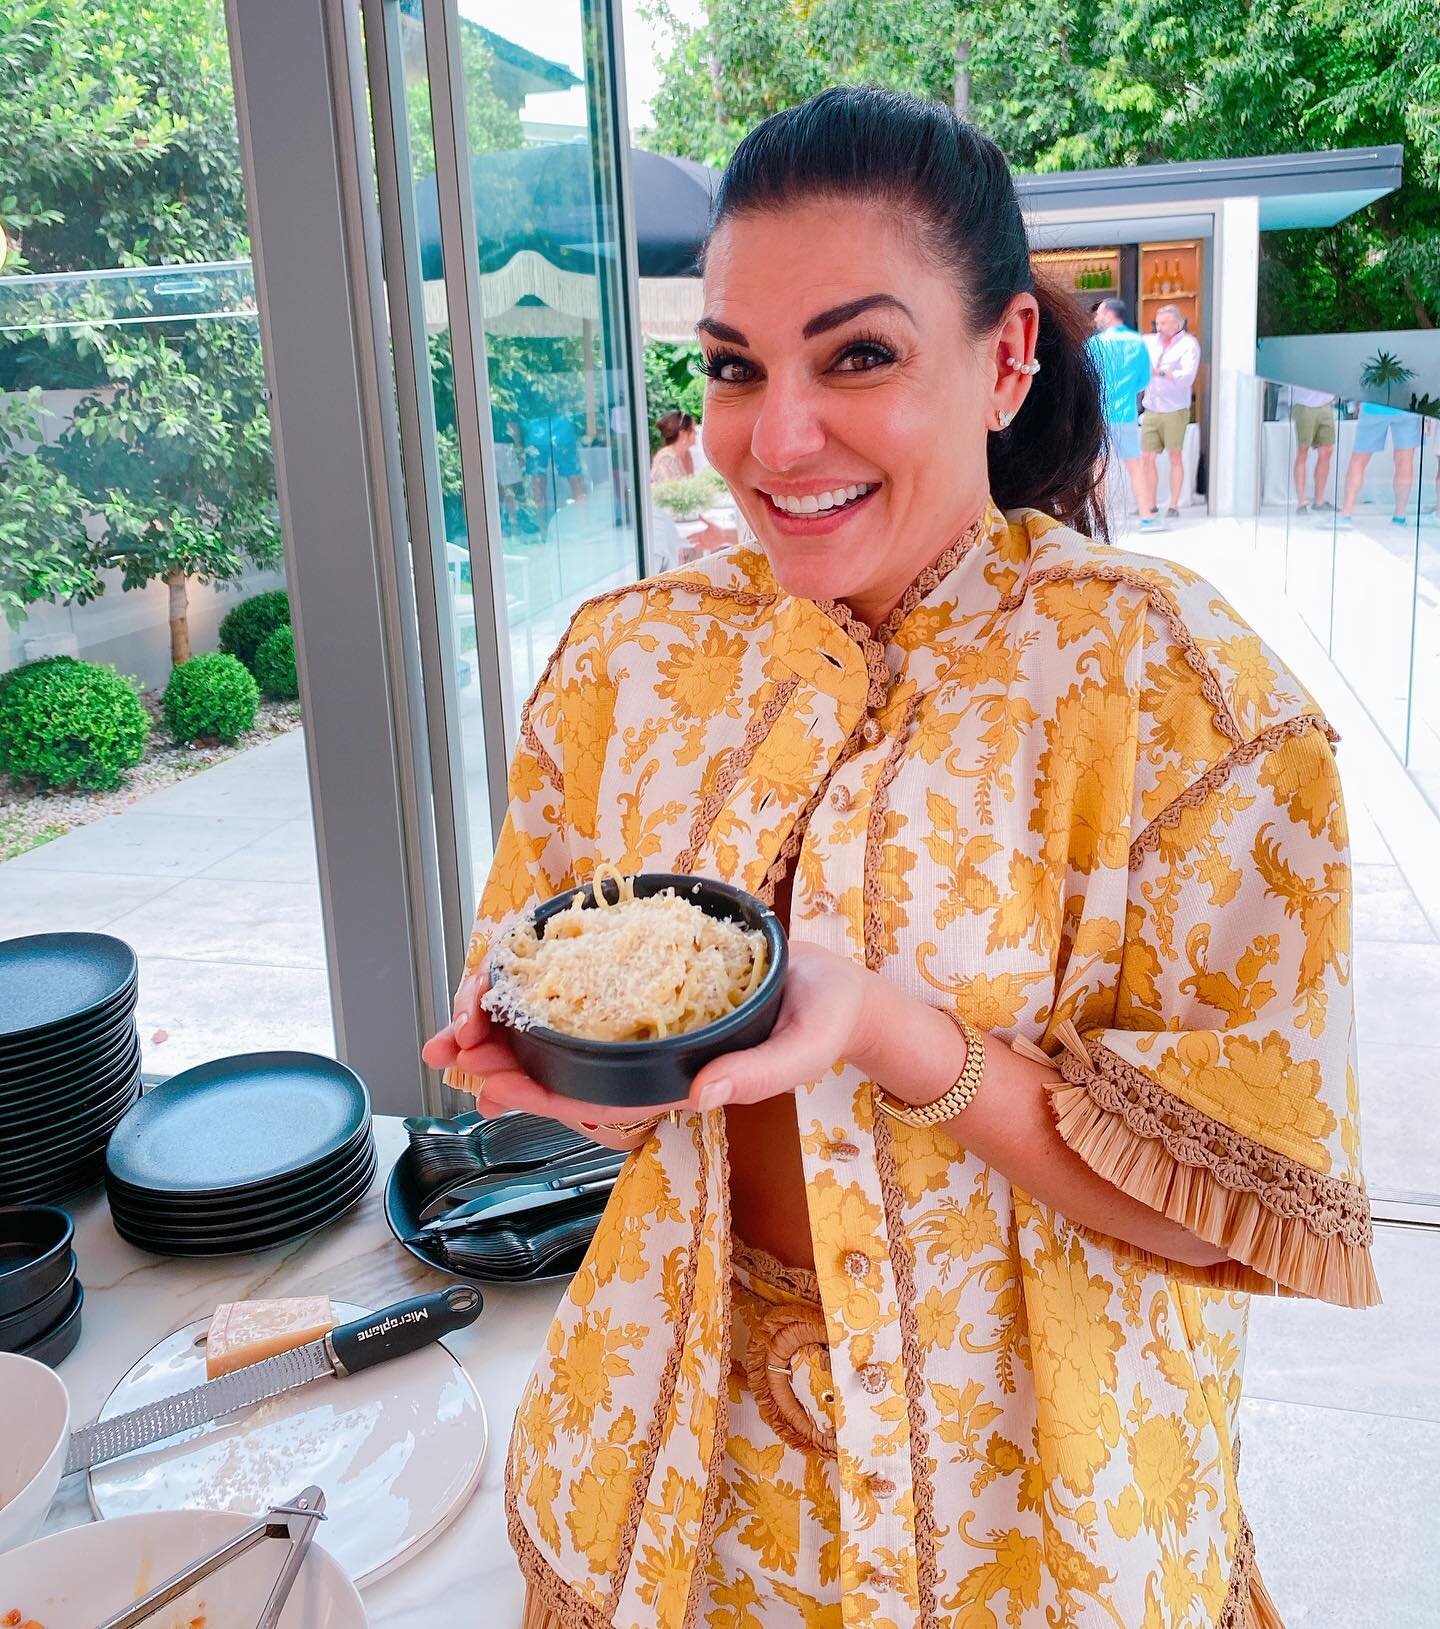 The beautiful @nicolegazaloneil with our fresh pasta option. 😍😍 We are starting to take enquiries for May onwards. Weekends only. We&rsquo;ve found a happy day spot to busy ourselves with. Get in touch meetme@platterwonderland.com